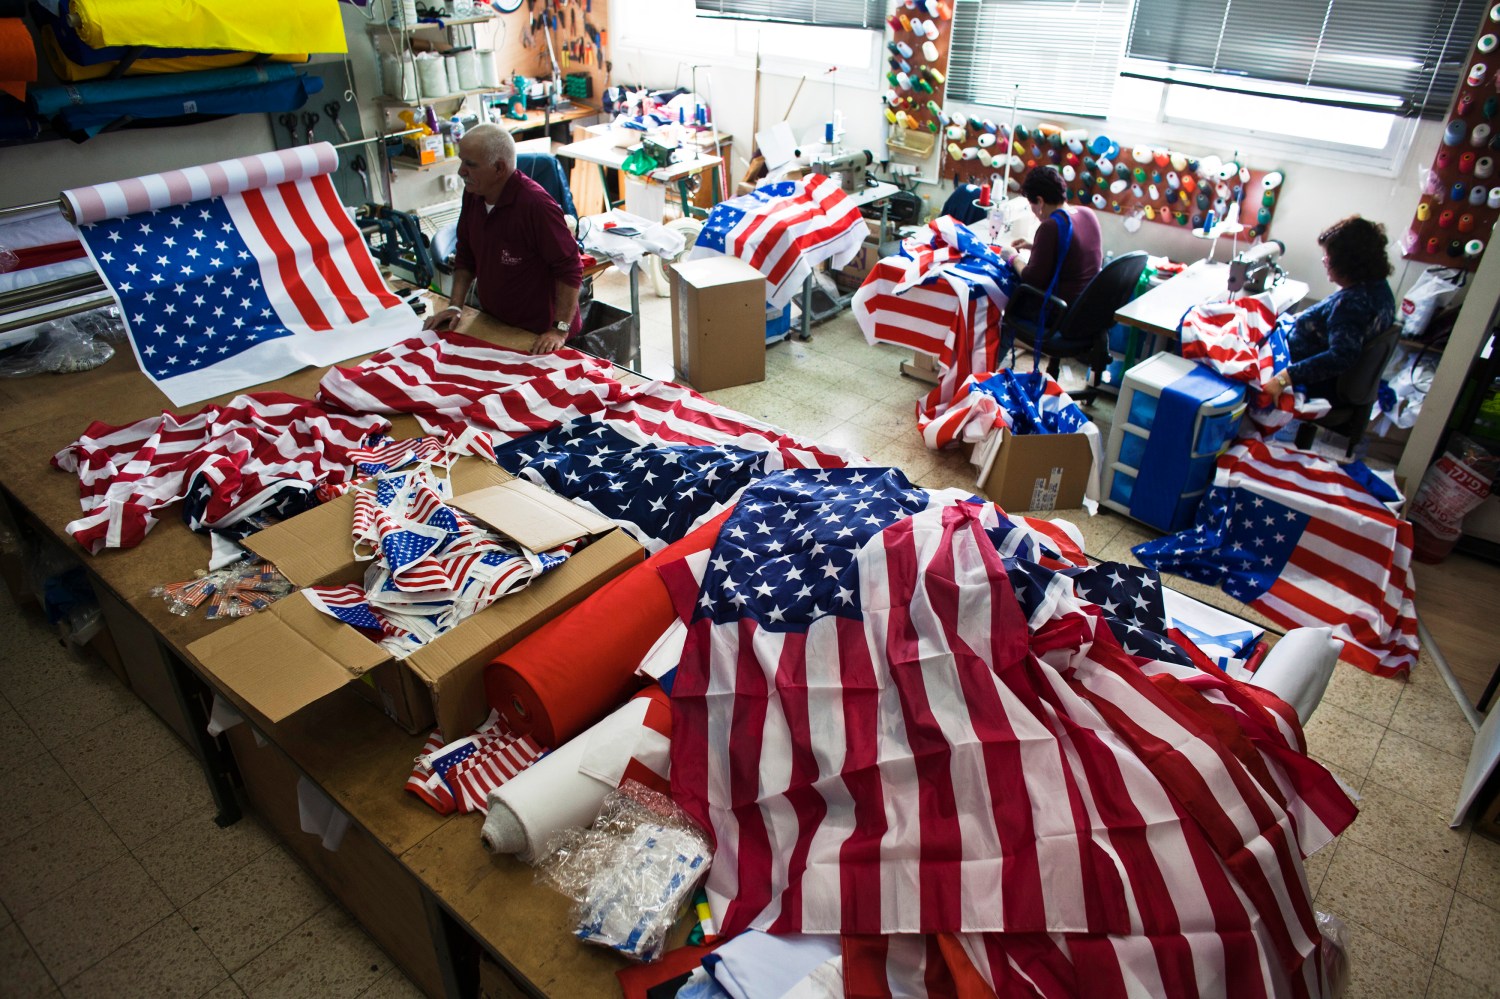 Workers at a factory in Kfar Saba near Tel Aviv sew U.S. flags that were ordered ahead of President Barack Obama's visit to Israel March 12, 2013. It was the most work the factory has had since Egyptian President Anwar Sadat visited Israel in 1977, owner Avi Marom said on Tuesday. The White House has yet to officially announce the dates for the trip, but Israeli news media have reported that Obama will arrive in Israel on March 20. REUTERS/Nir Elias (ISRAEL - Tags: POLITICS) - RTR3EVOE